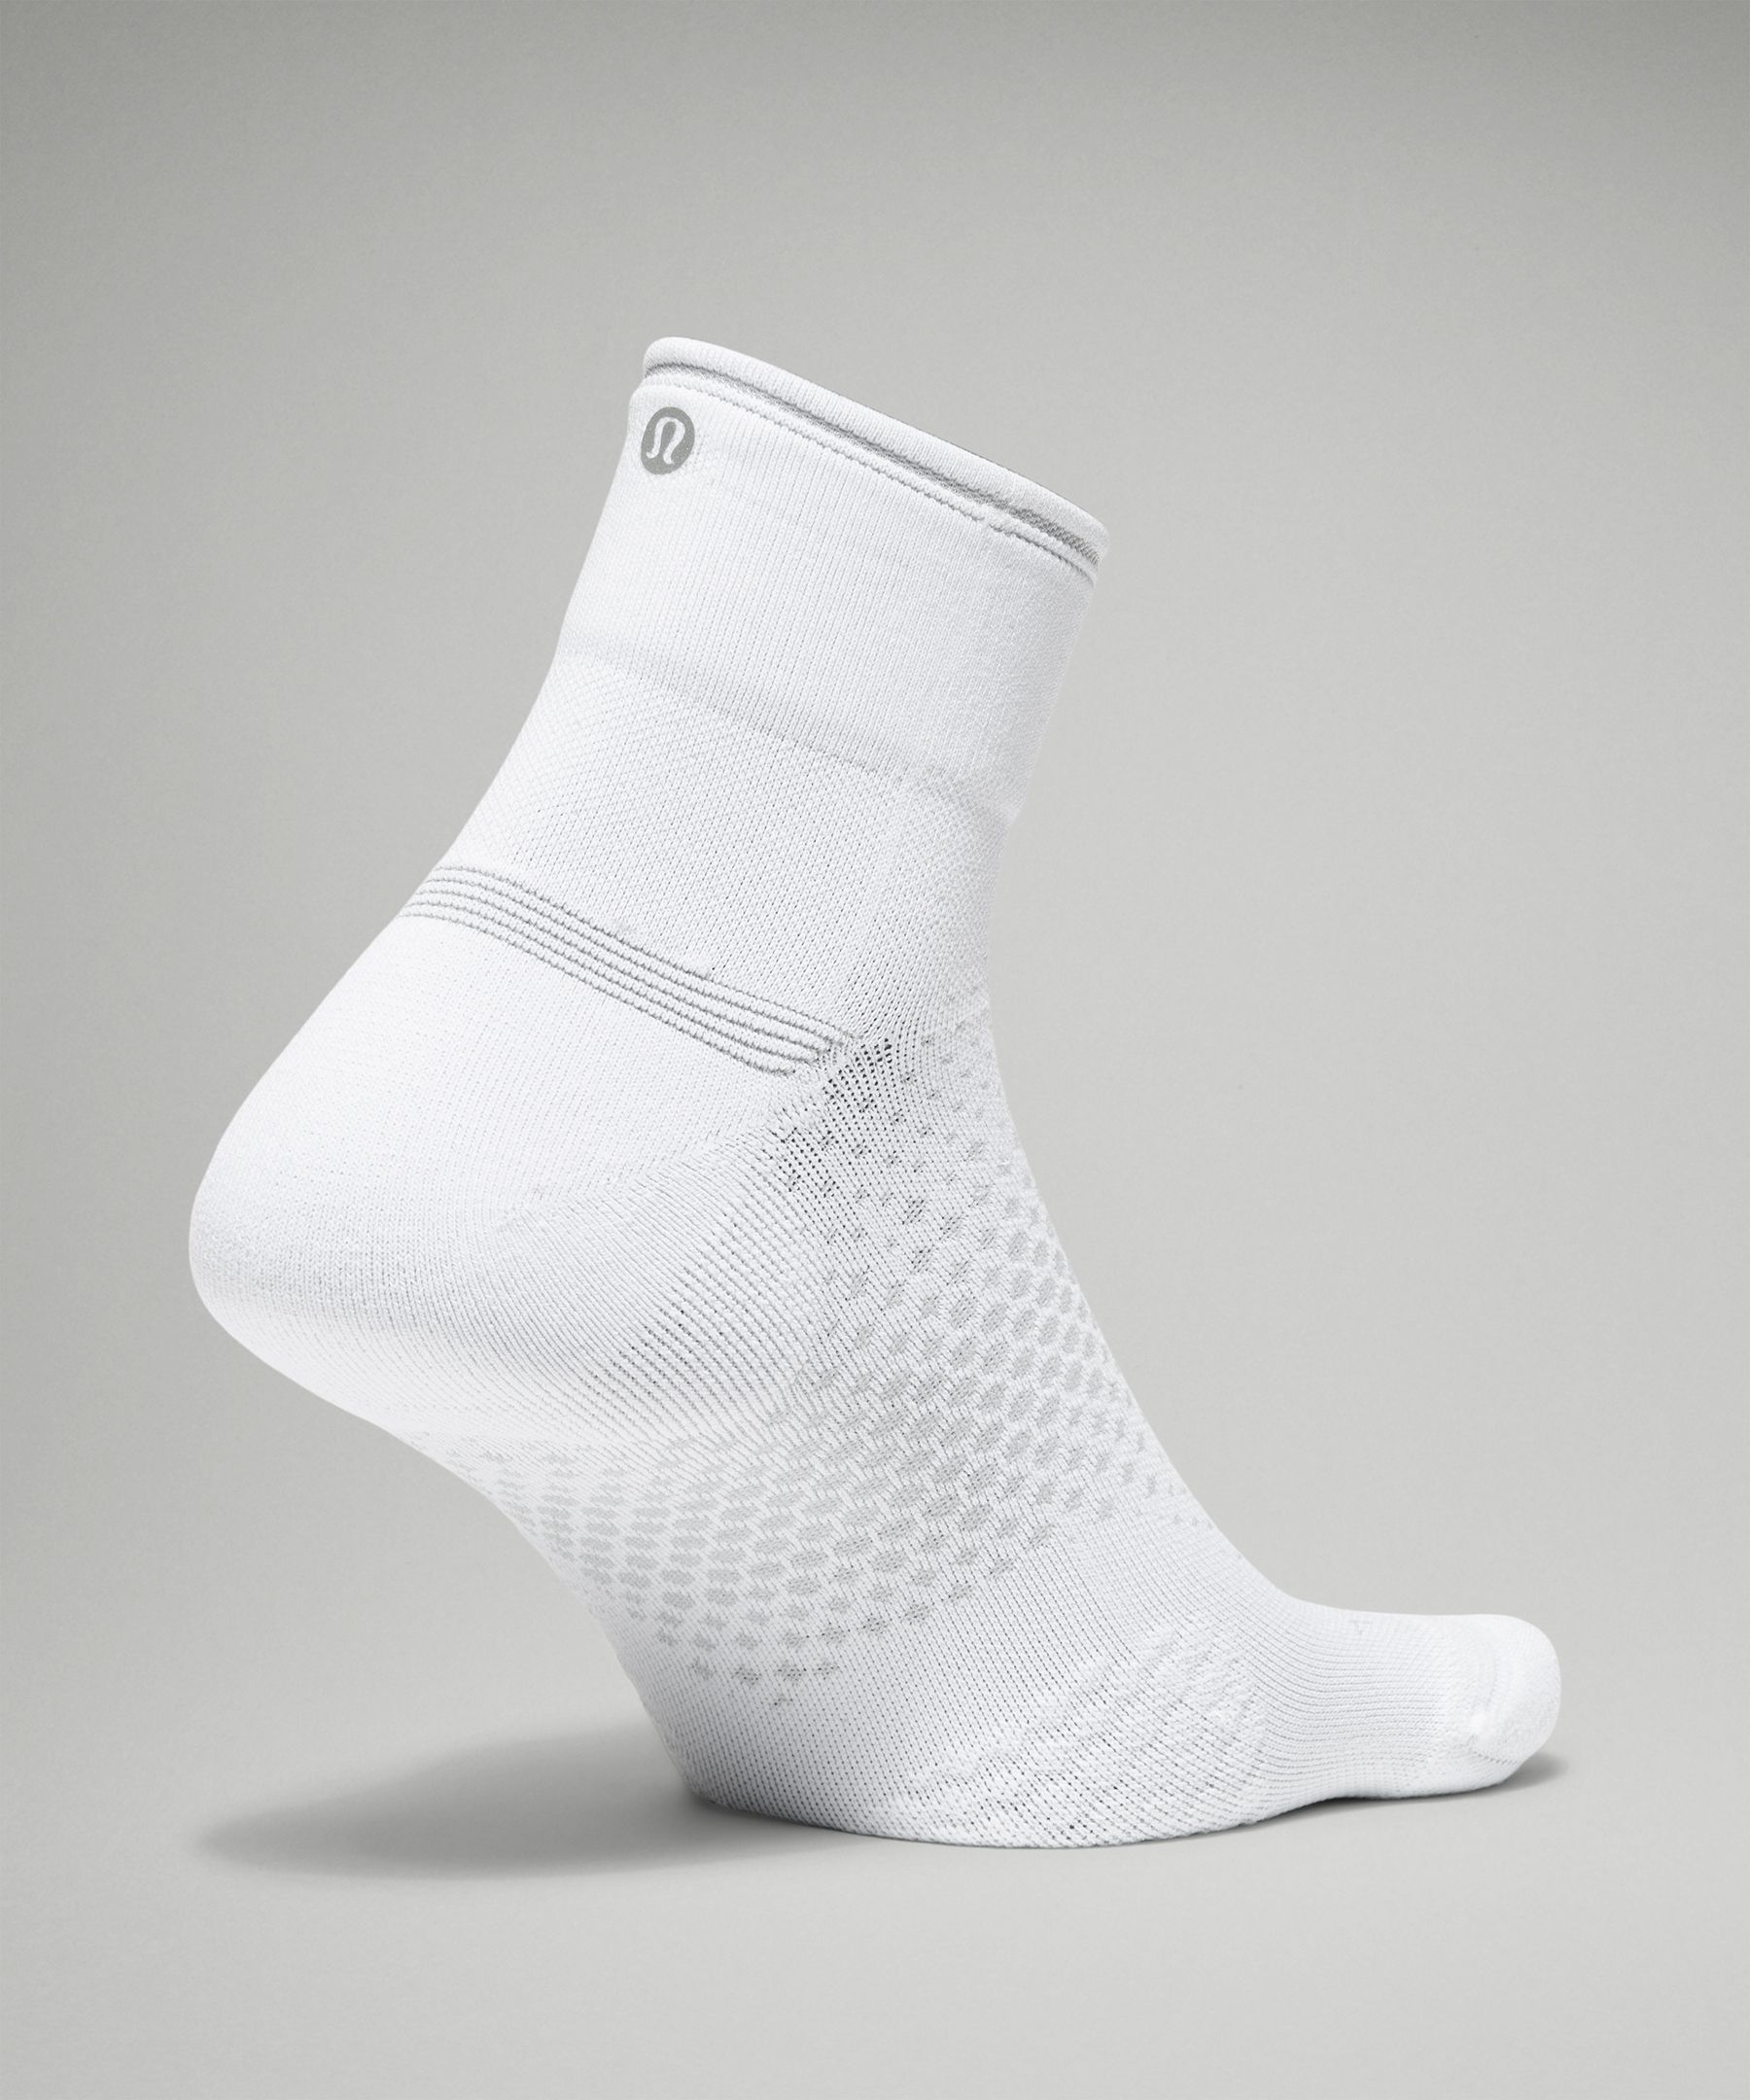 Run in Comfort: Elevate Your Workout with Running Socks